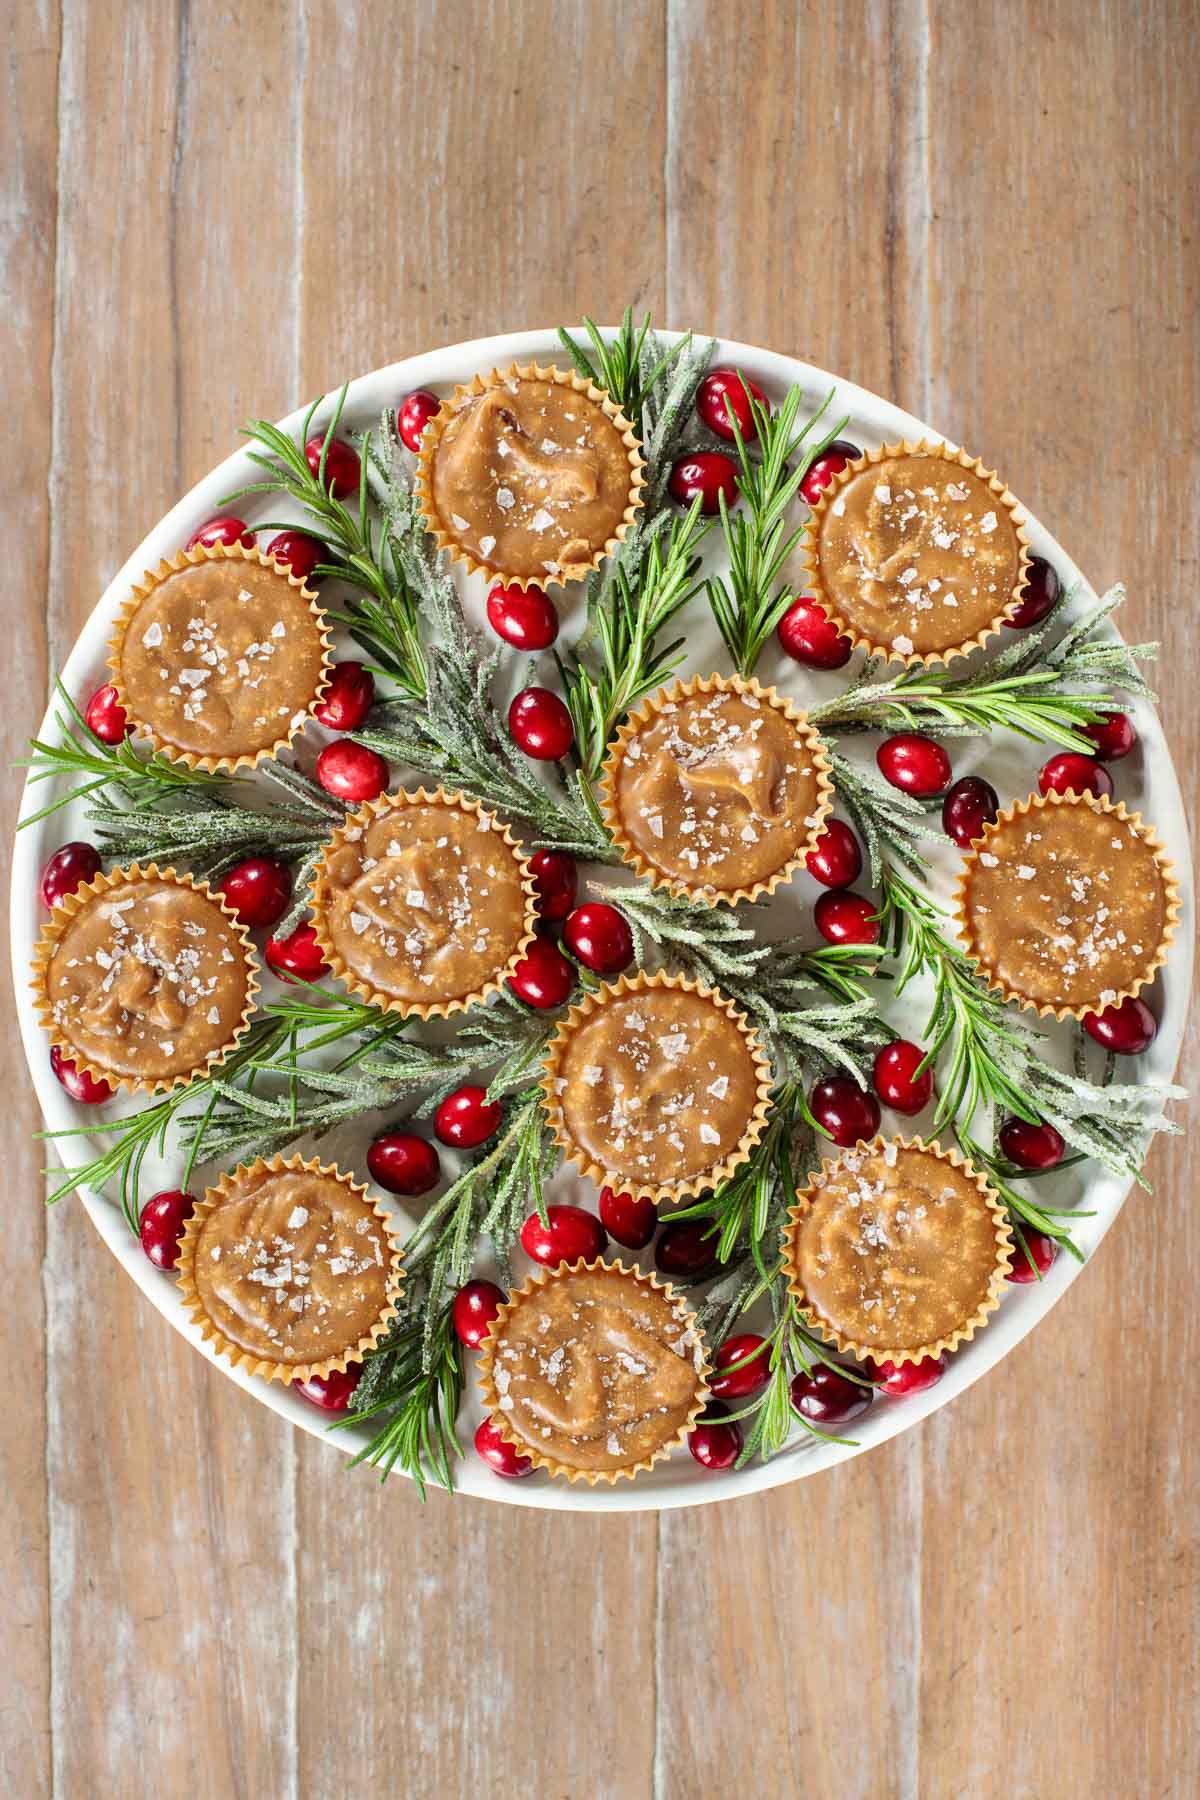 Vertical overhead picture of Brown Sugar Fudge garnished with rosemary and cranberries